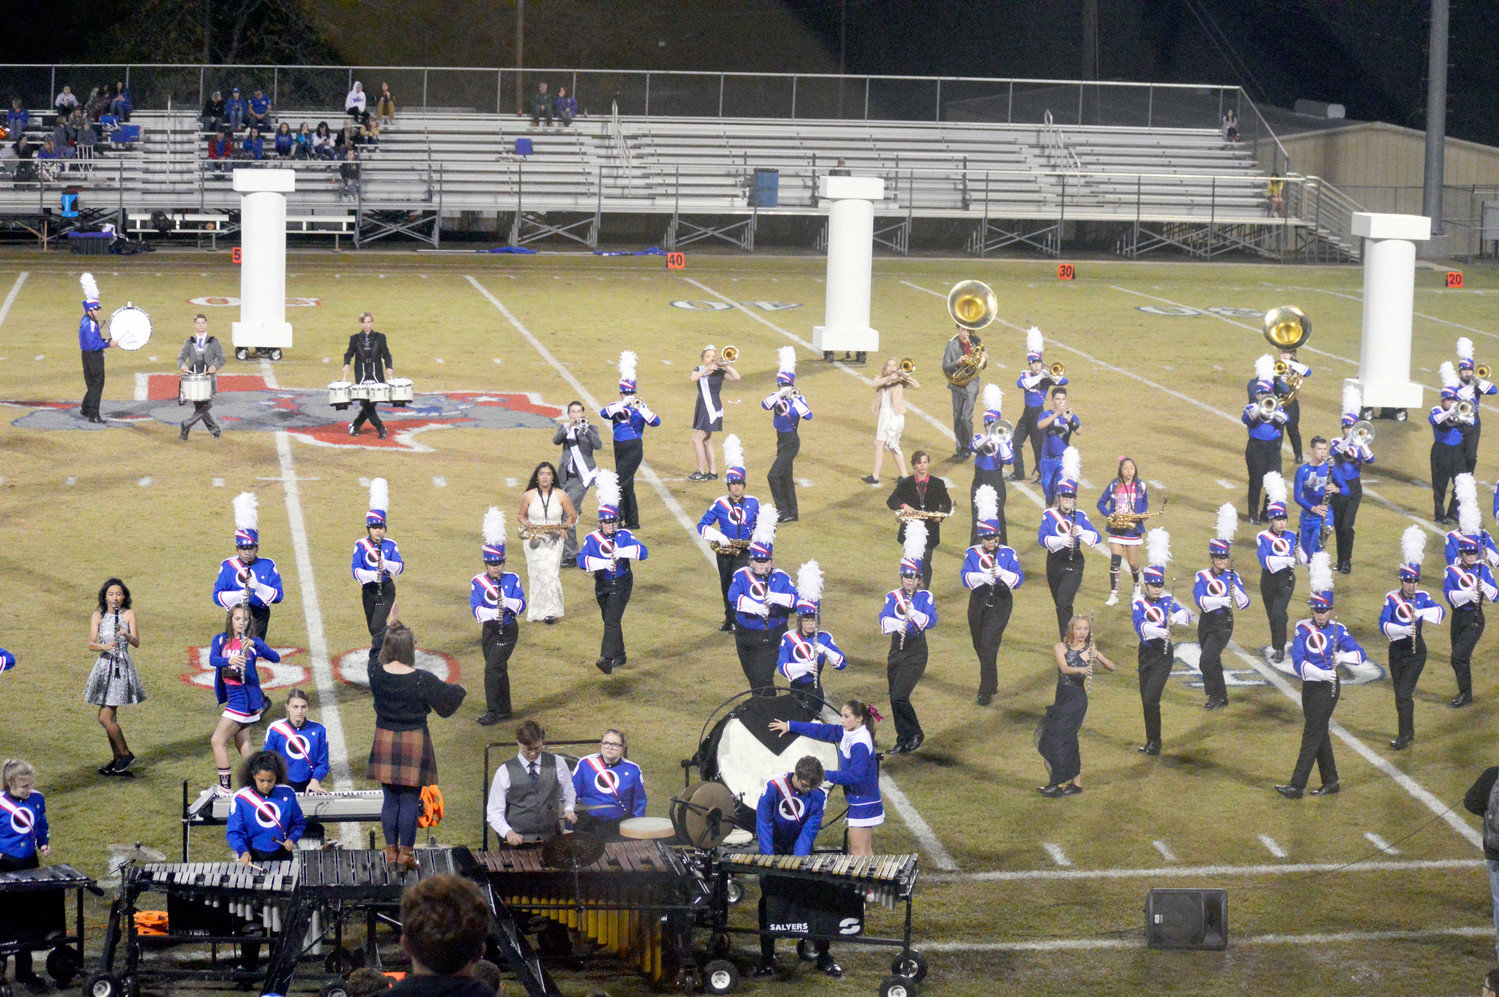 The Quitman Proud Blue Band put on a great halftime show with their performance of their “Gladiator” program. (Monitor photo by Larry Tucker)